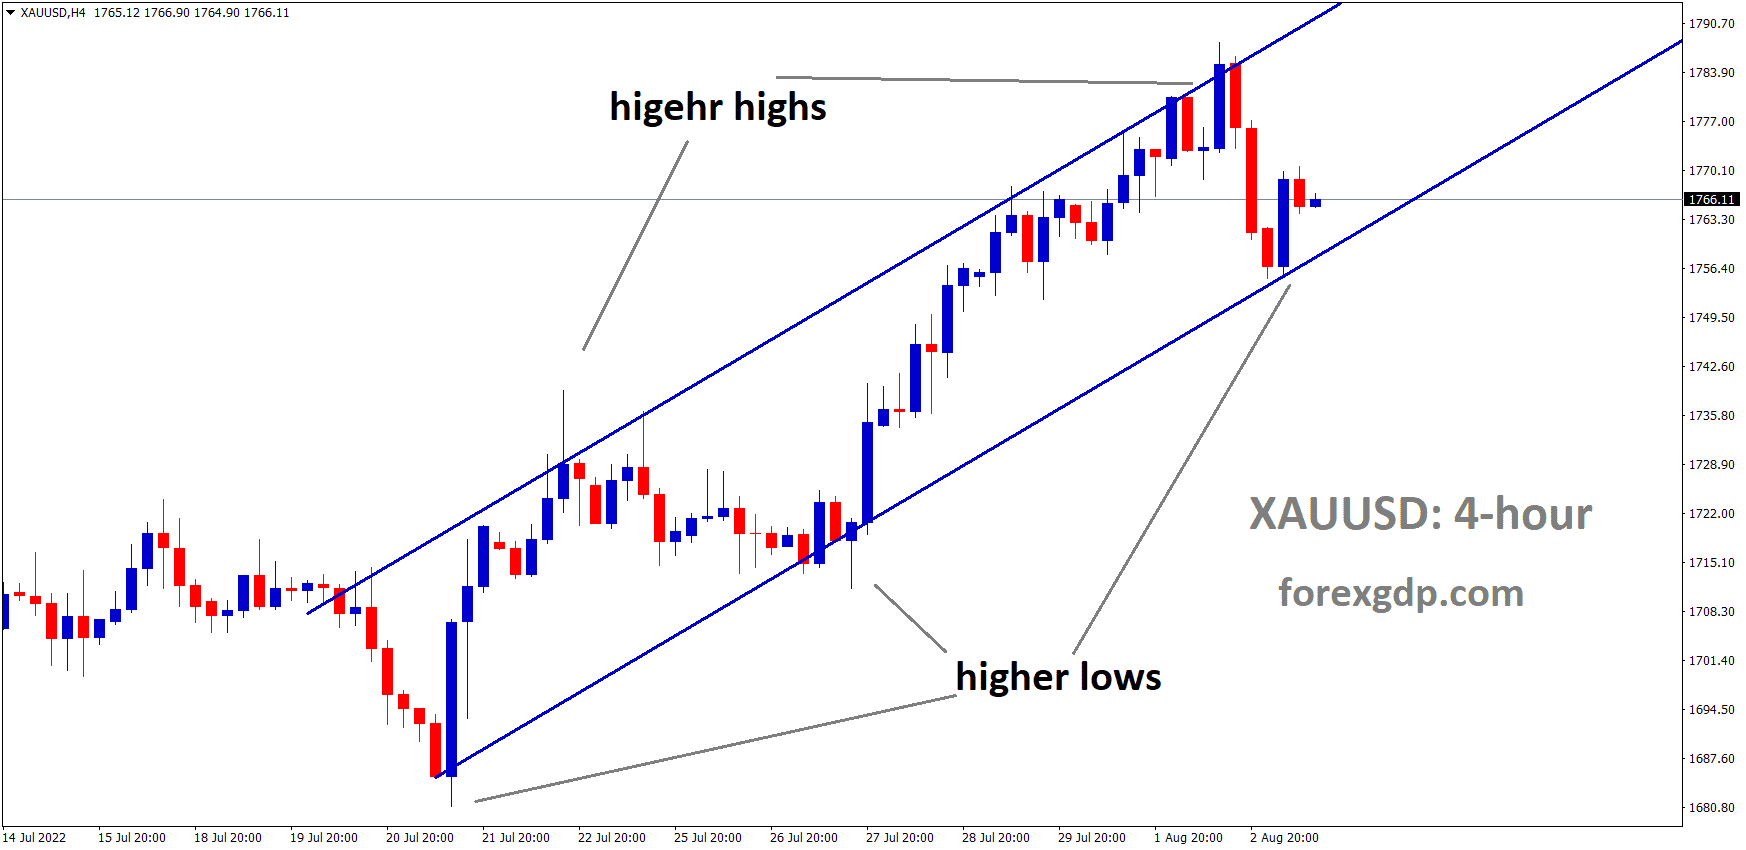 XAUUSD Gold price is moving in an Ascending channel and the Market has rebounded from the higher Low area of the channel 1